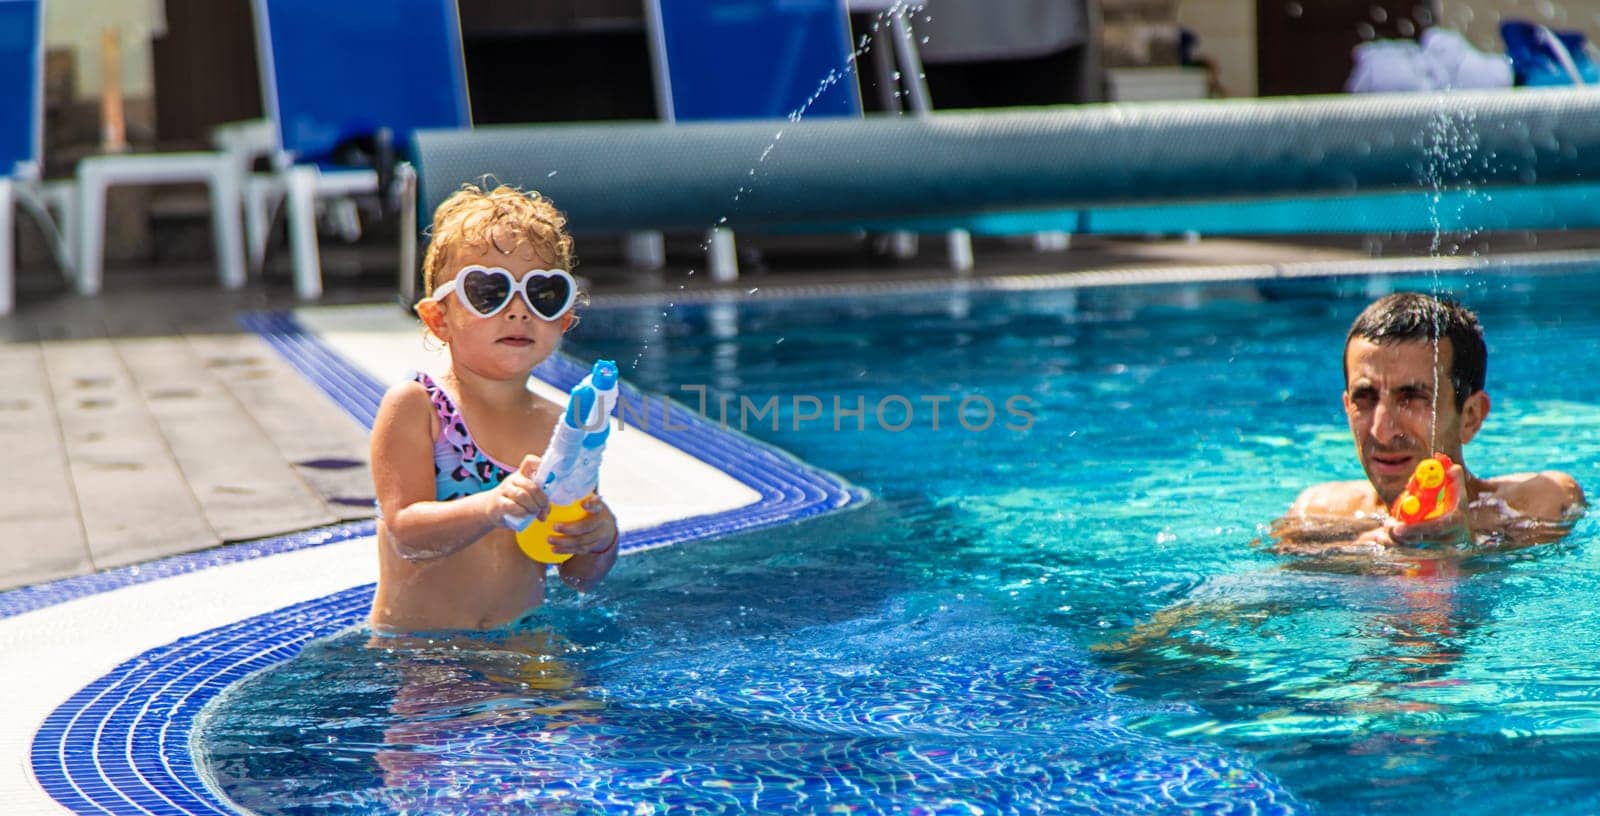 A child and his father play with a water pistol in the water. Selective focus. by yanadjana